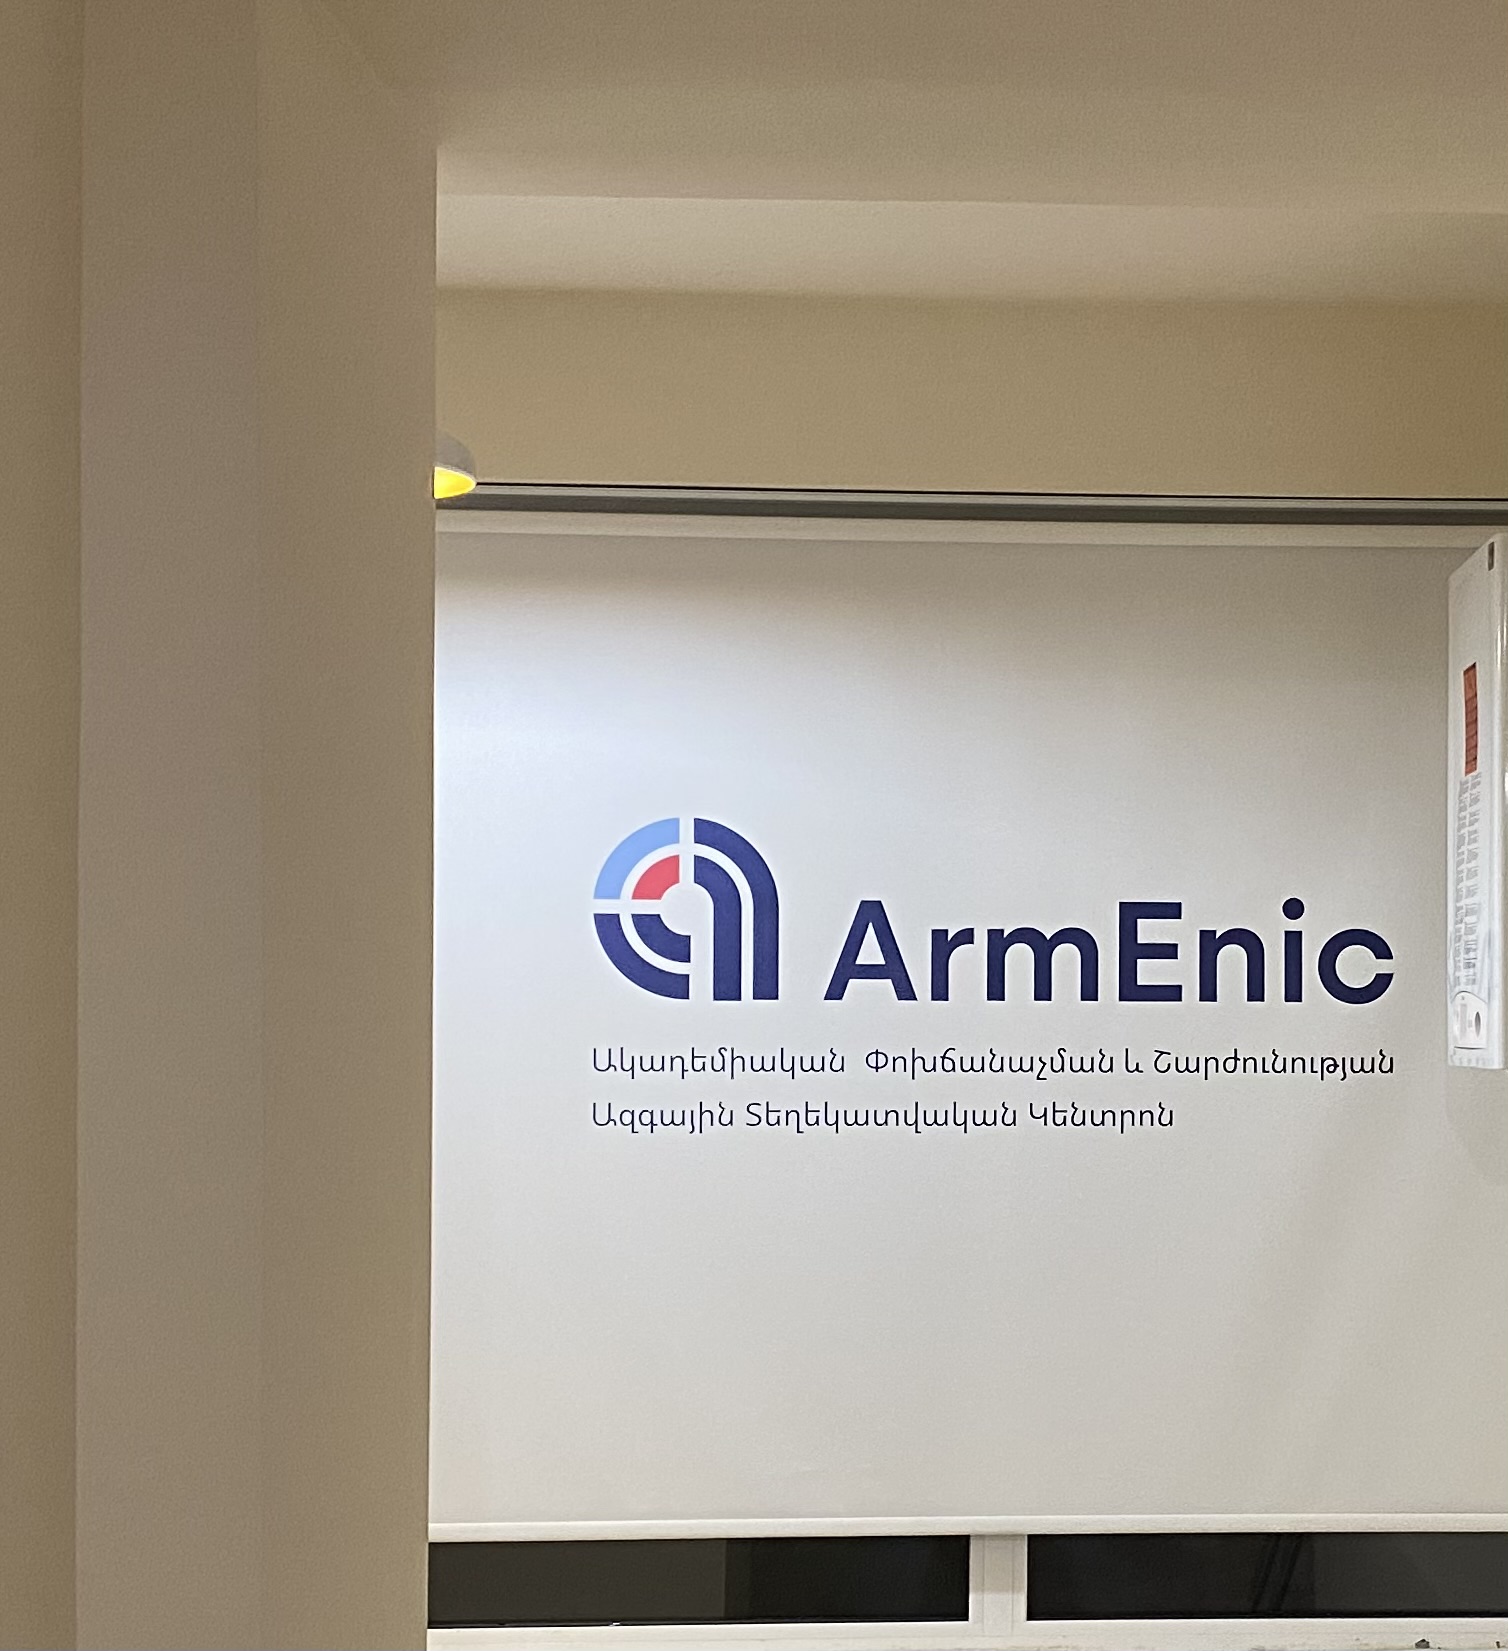 ArmEnic's OFFICE HAS MOVED TO A NEW ADDRESS